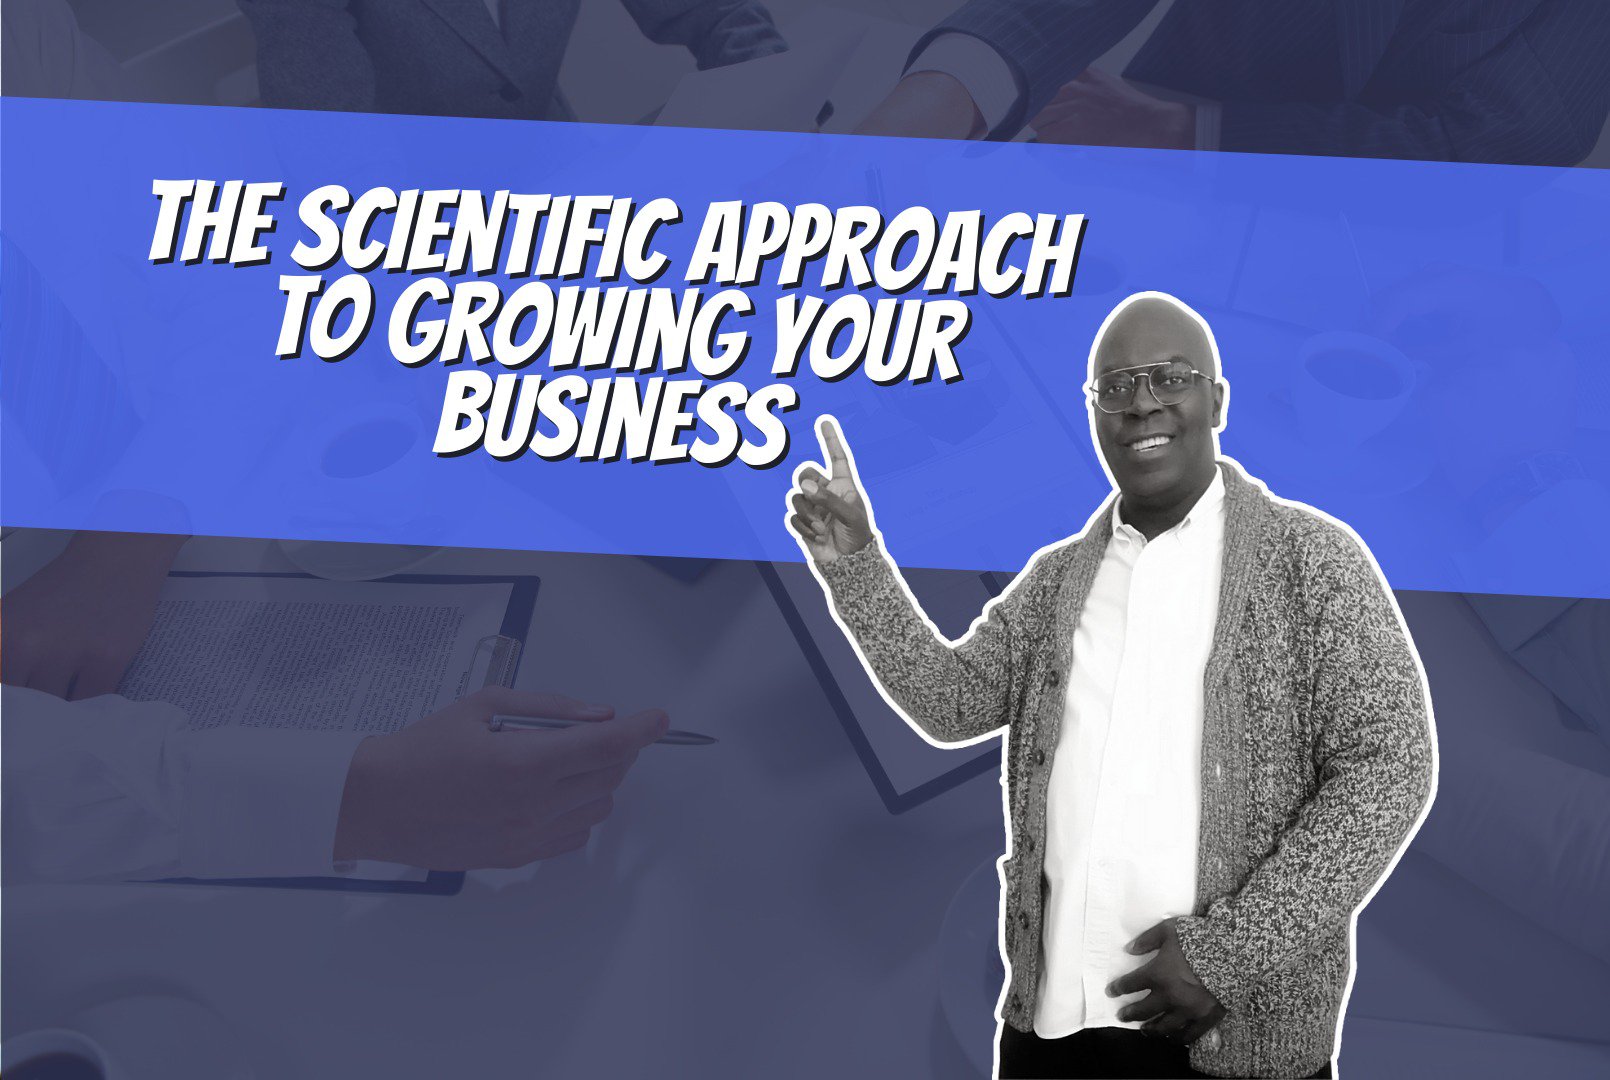 The Scientific Approach to Growing Your Business